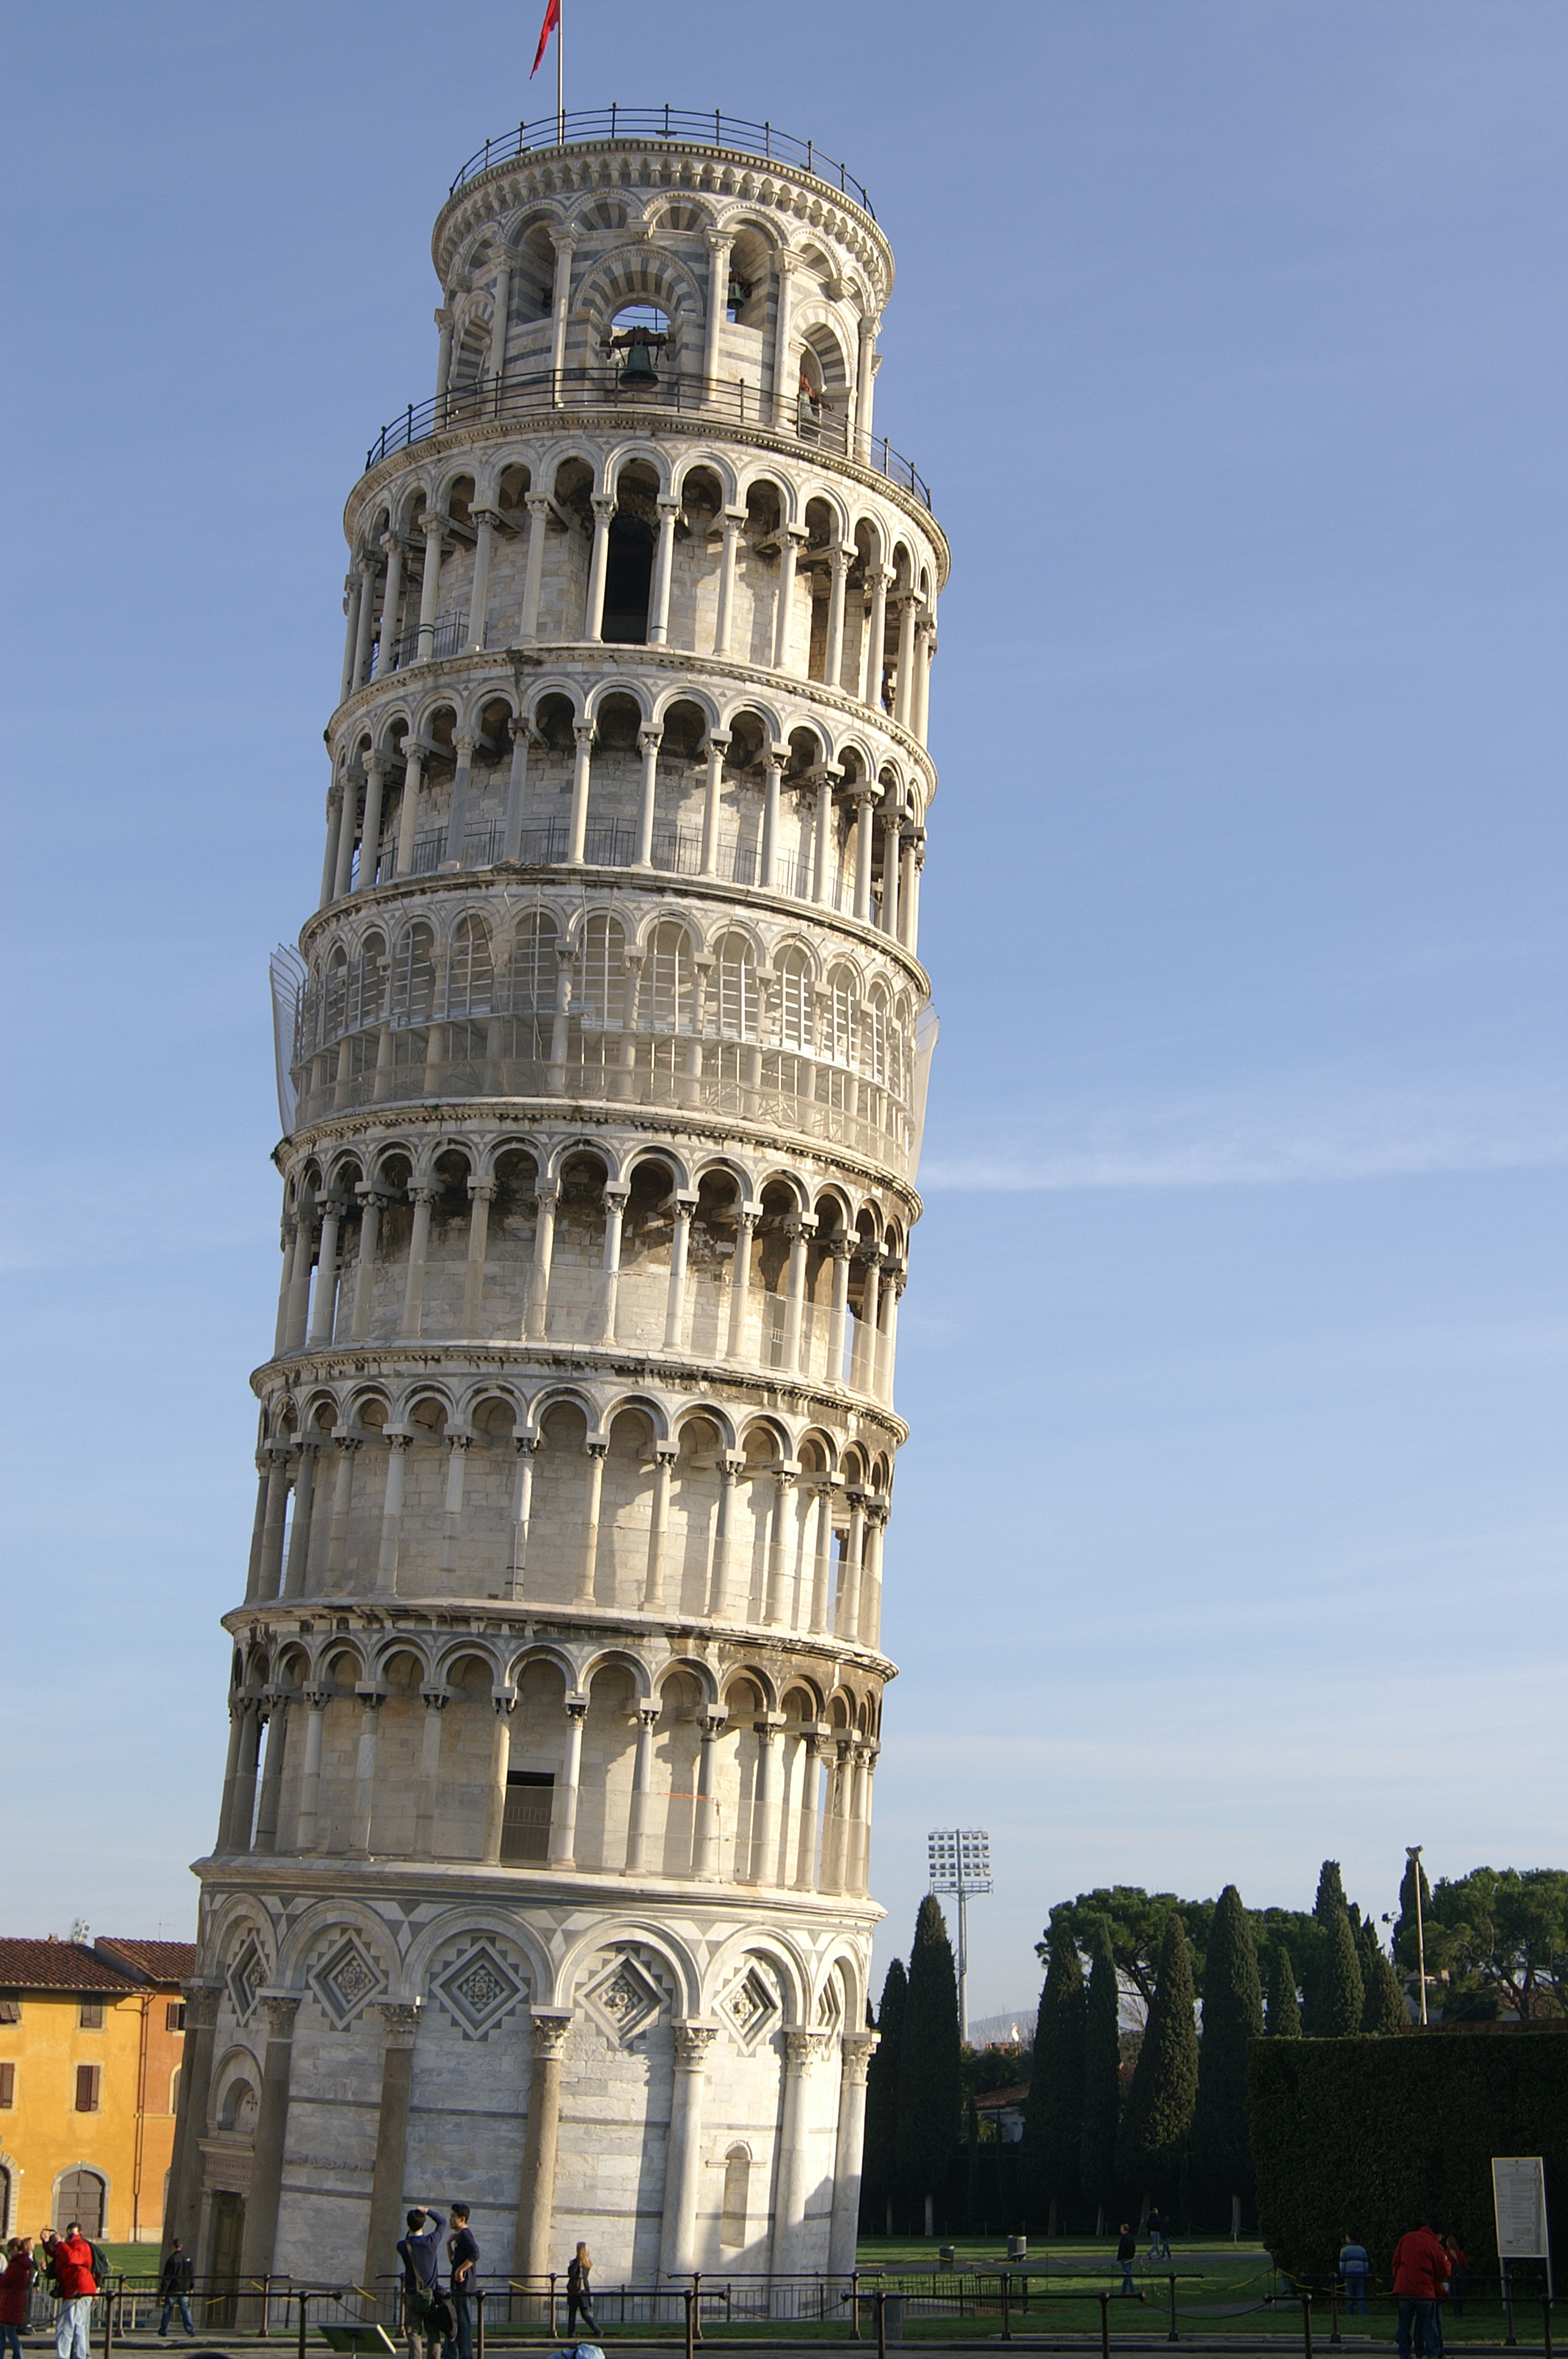 By David Wilmot (Leaning Tower of Pisa) [CC-BY-SA-2.0 (http://creativecommons.org/licenses/by-sa/2.0)], via Wikimedia Commons